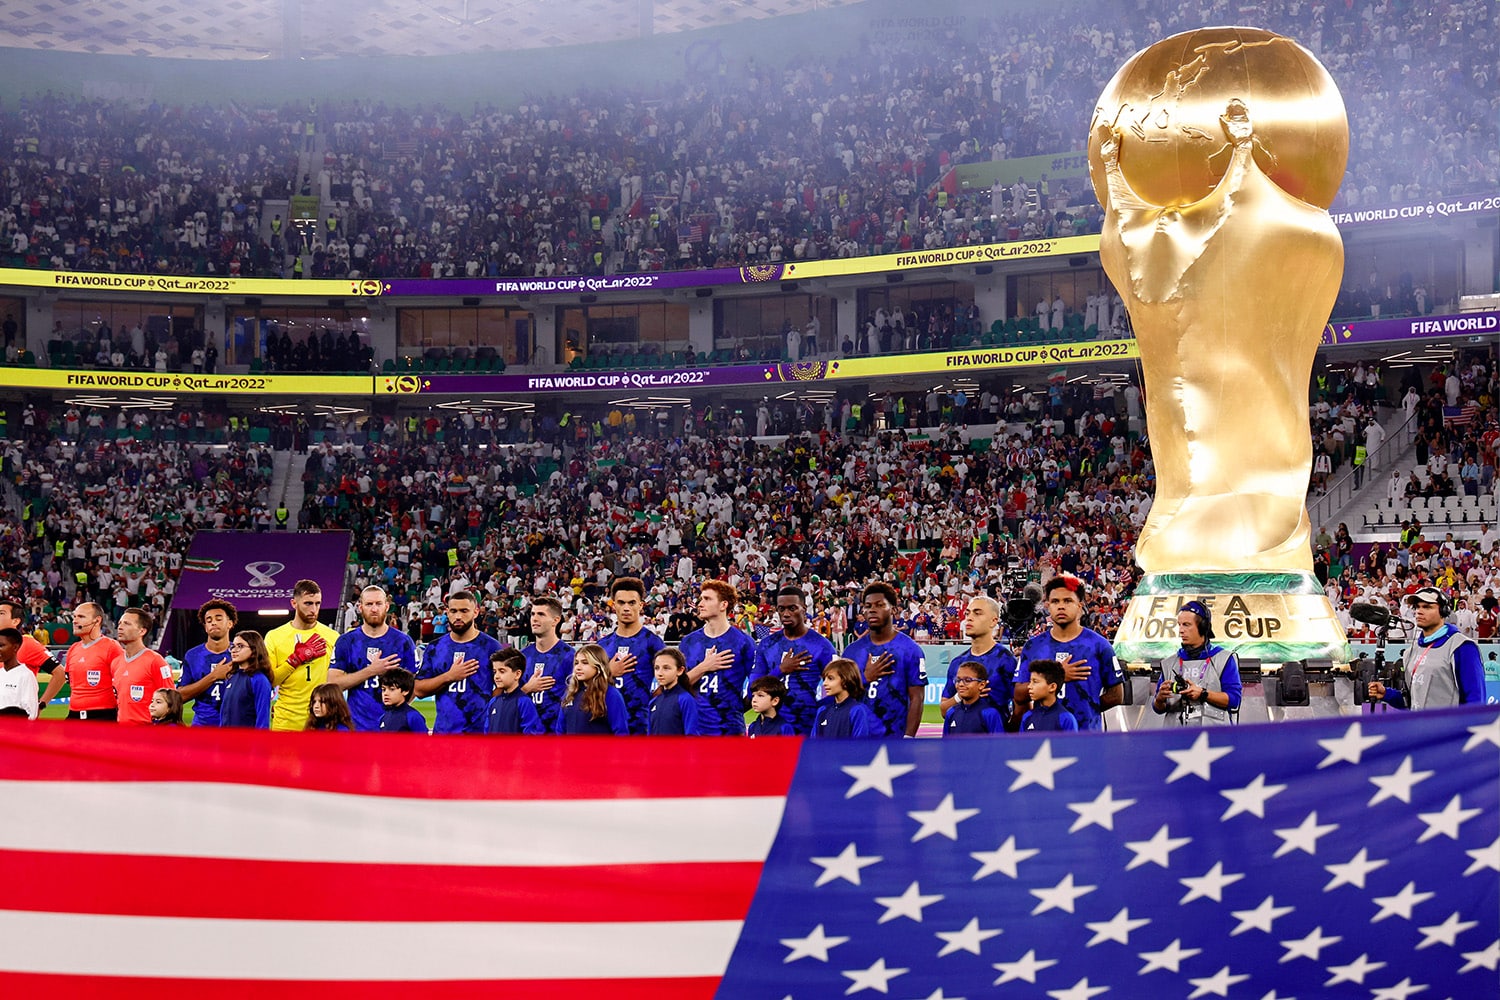 USMNT players sing along to national anthem during World Cup match